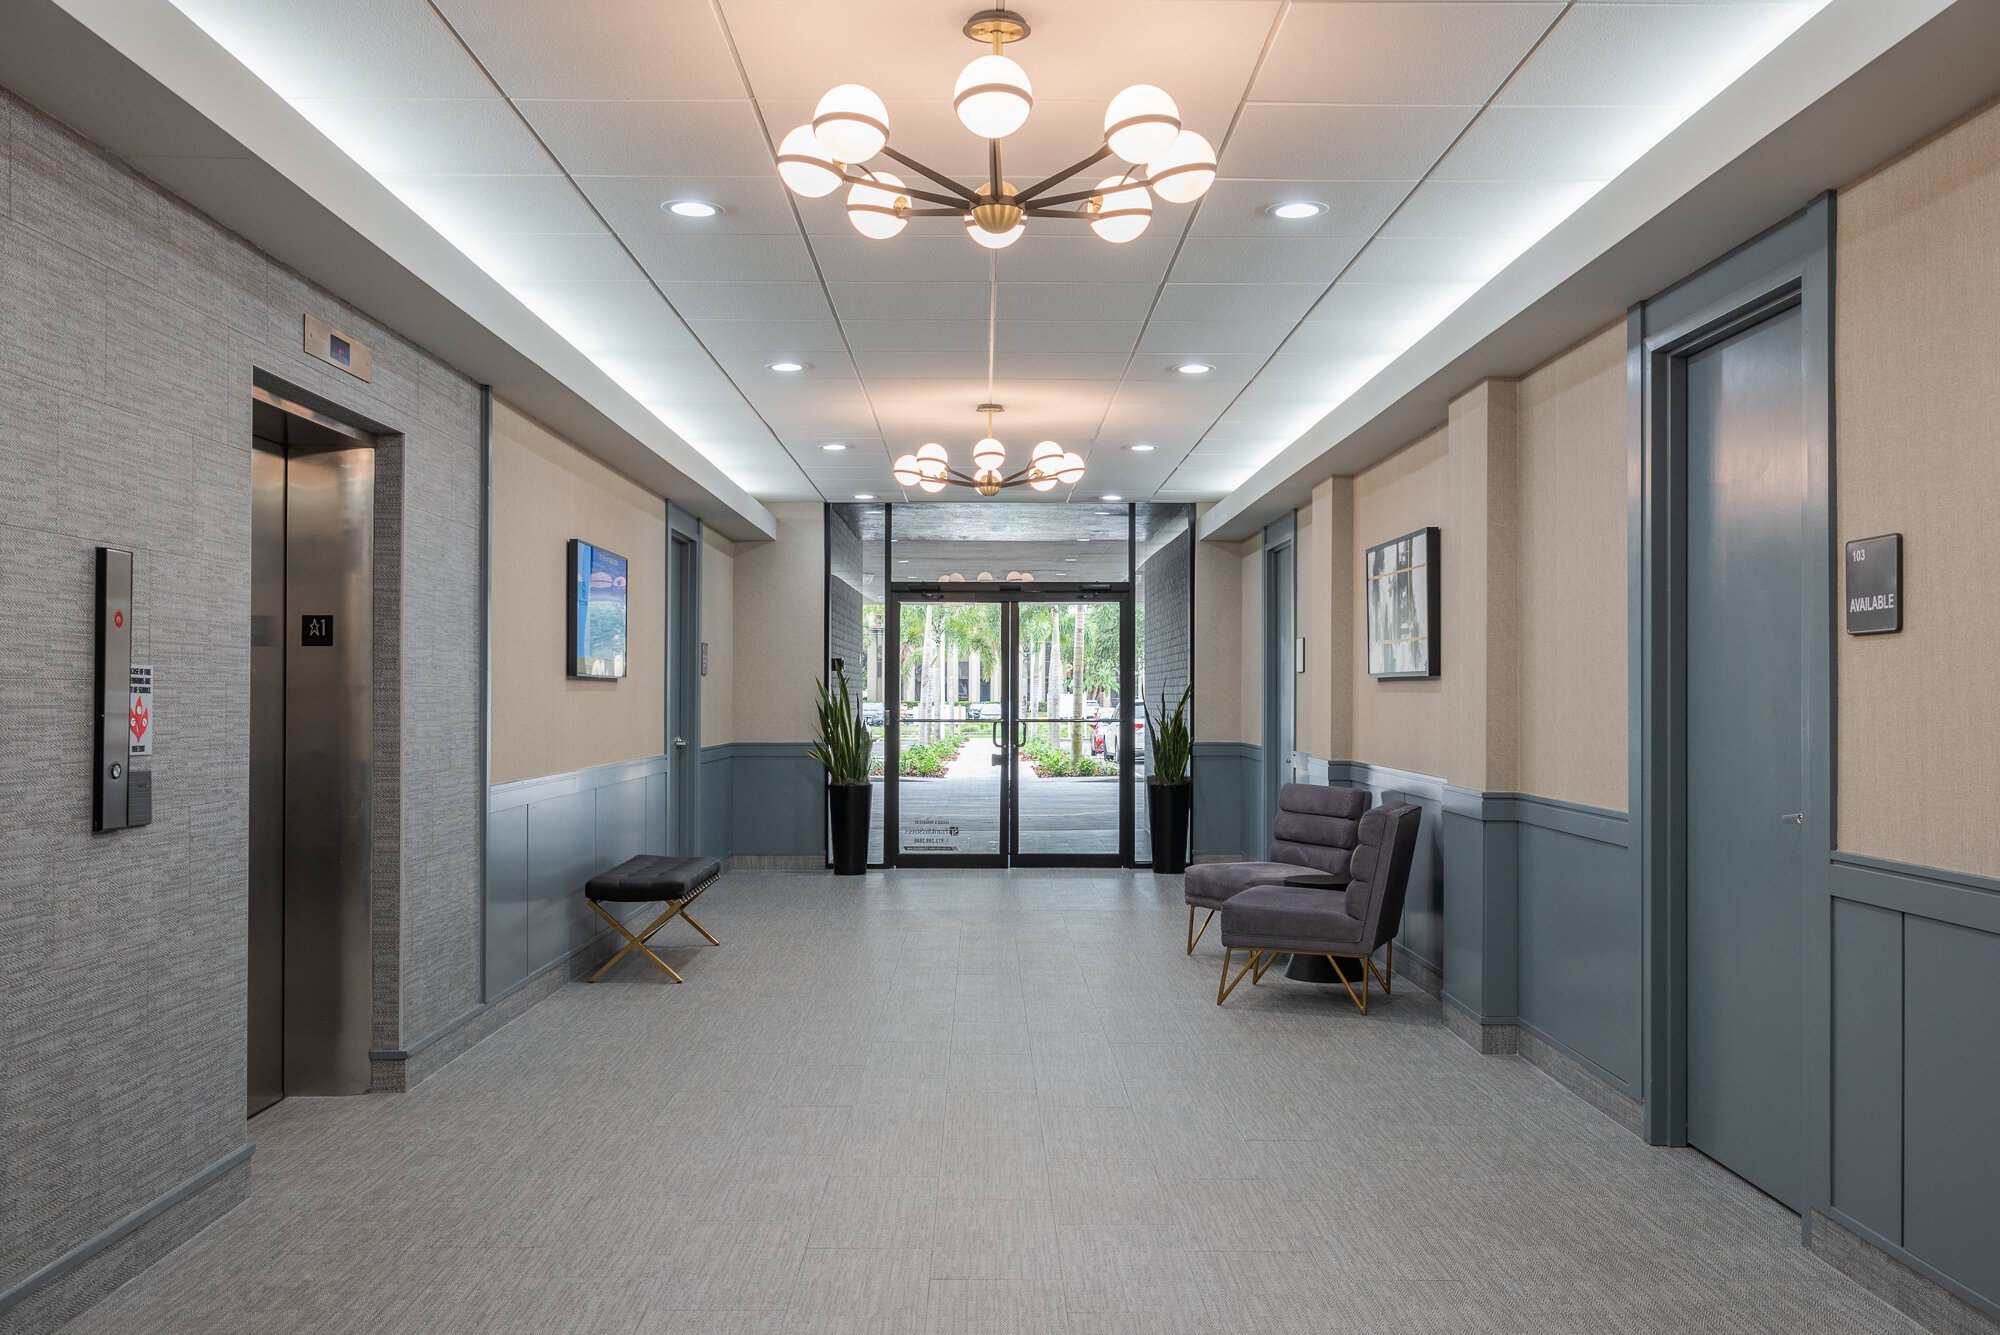 Office lobby grey and muted teal with ball chandelier